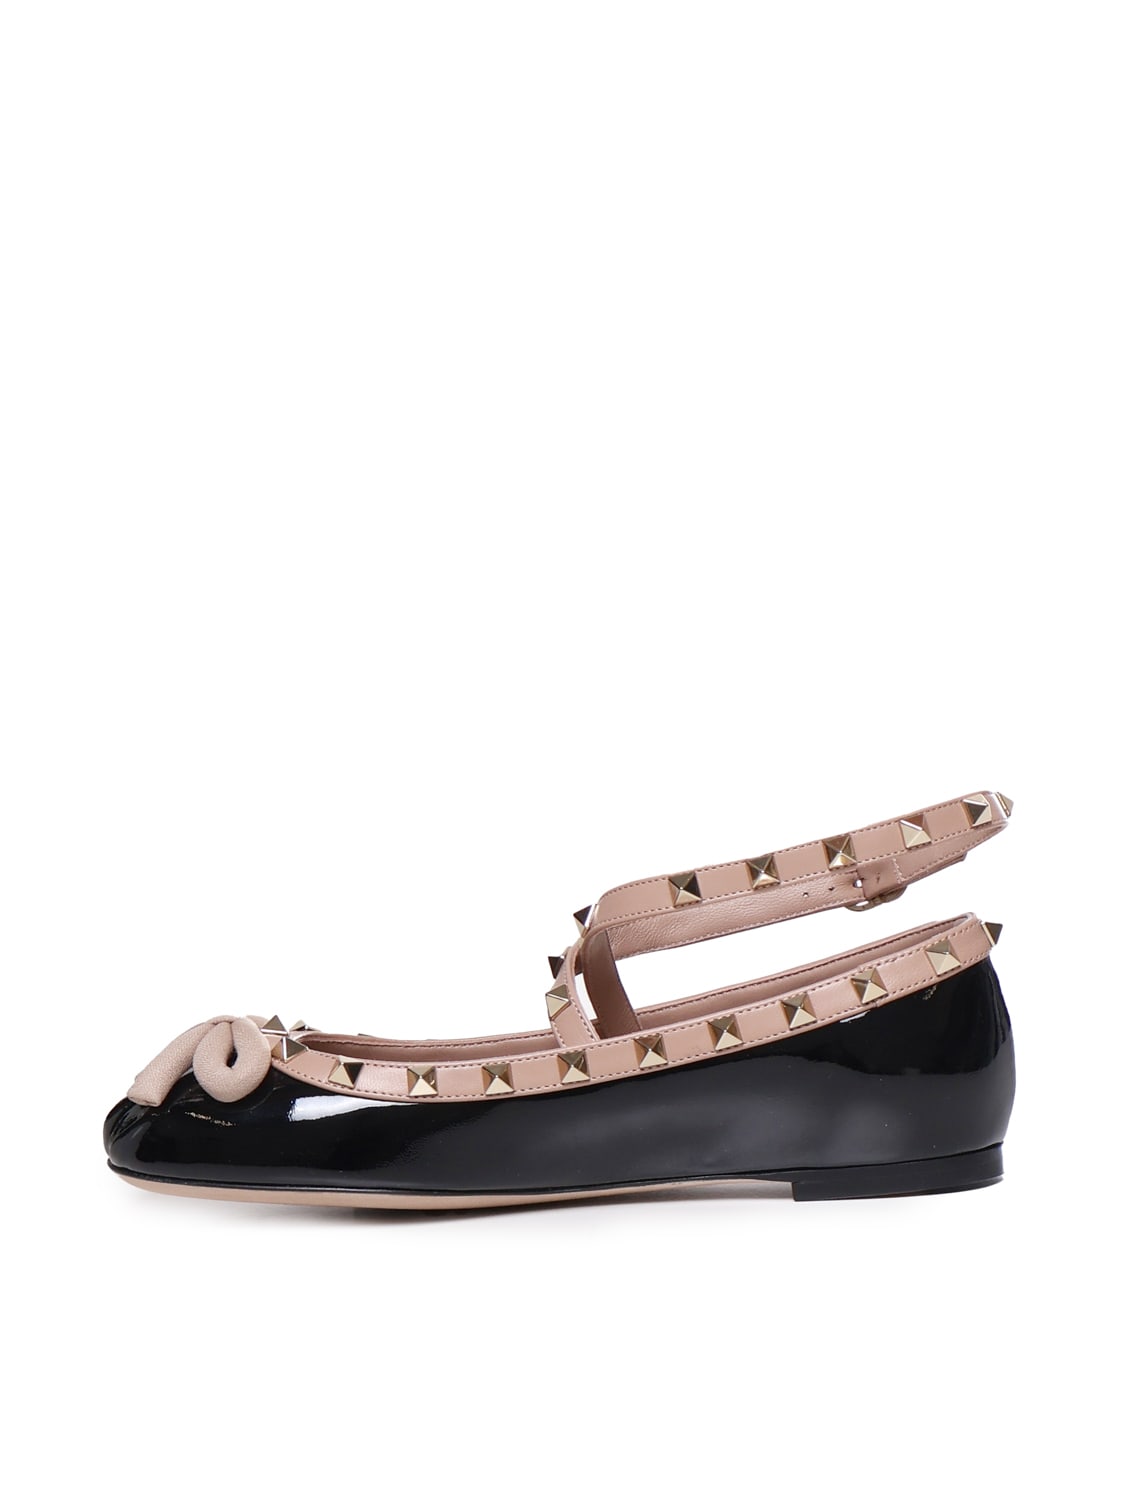 Shop Valentino Rockstud Ballerinas In Patent Leather In Black/rose Cannelle